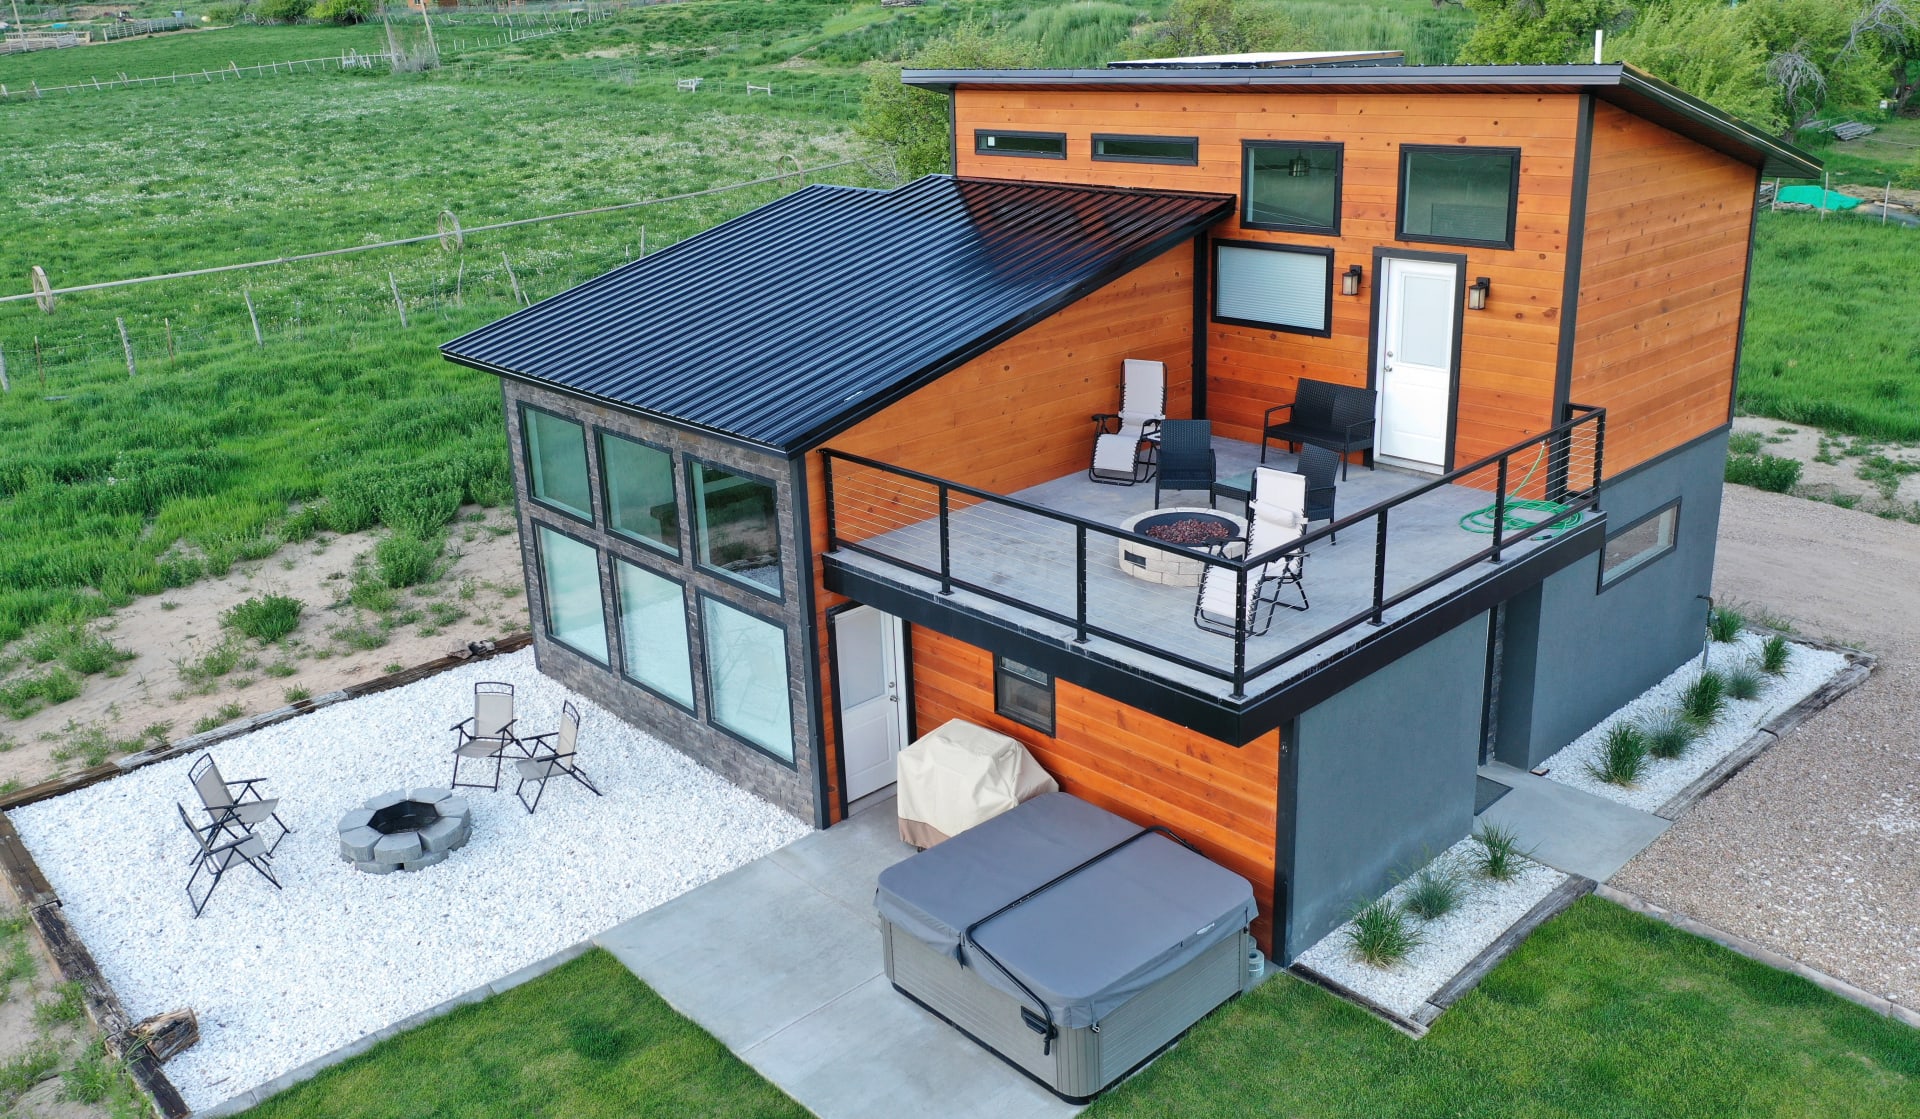 Birds-eye view of our unique cabin!